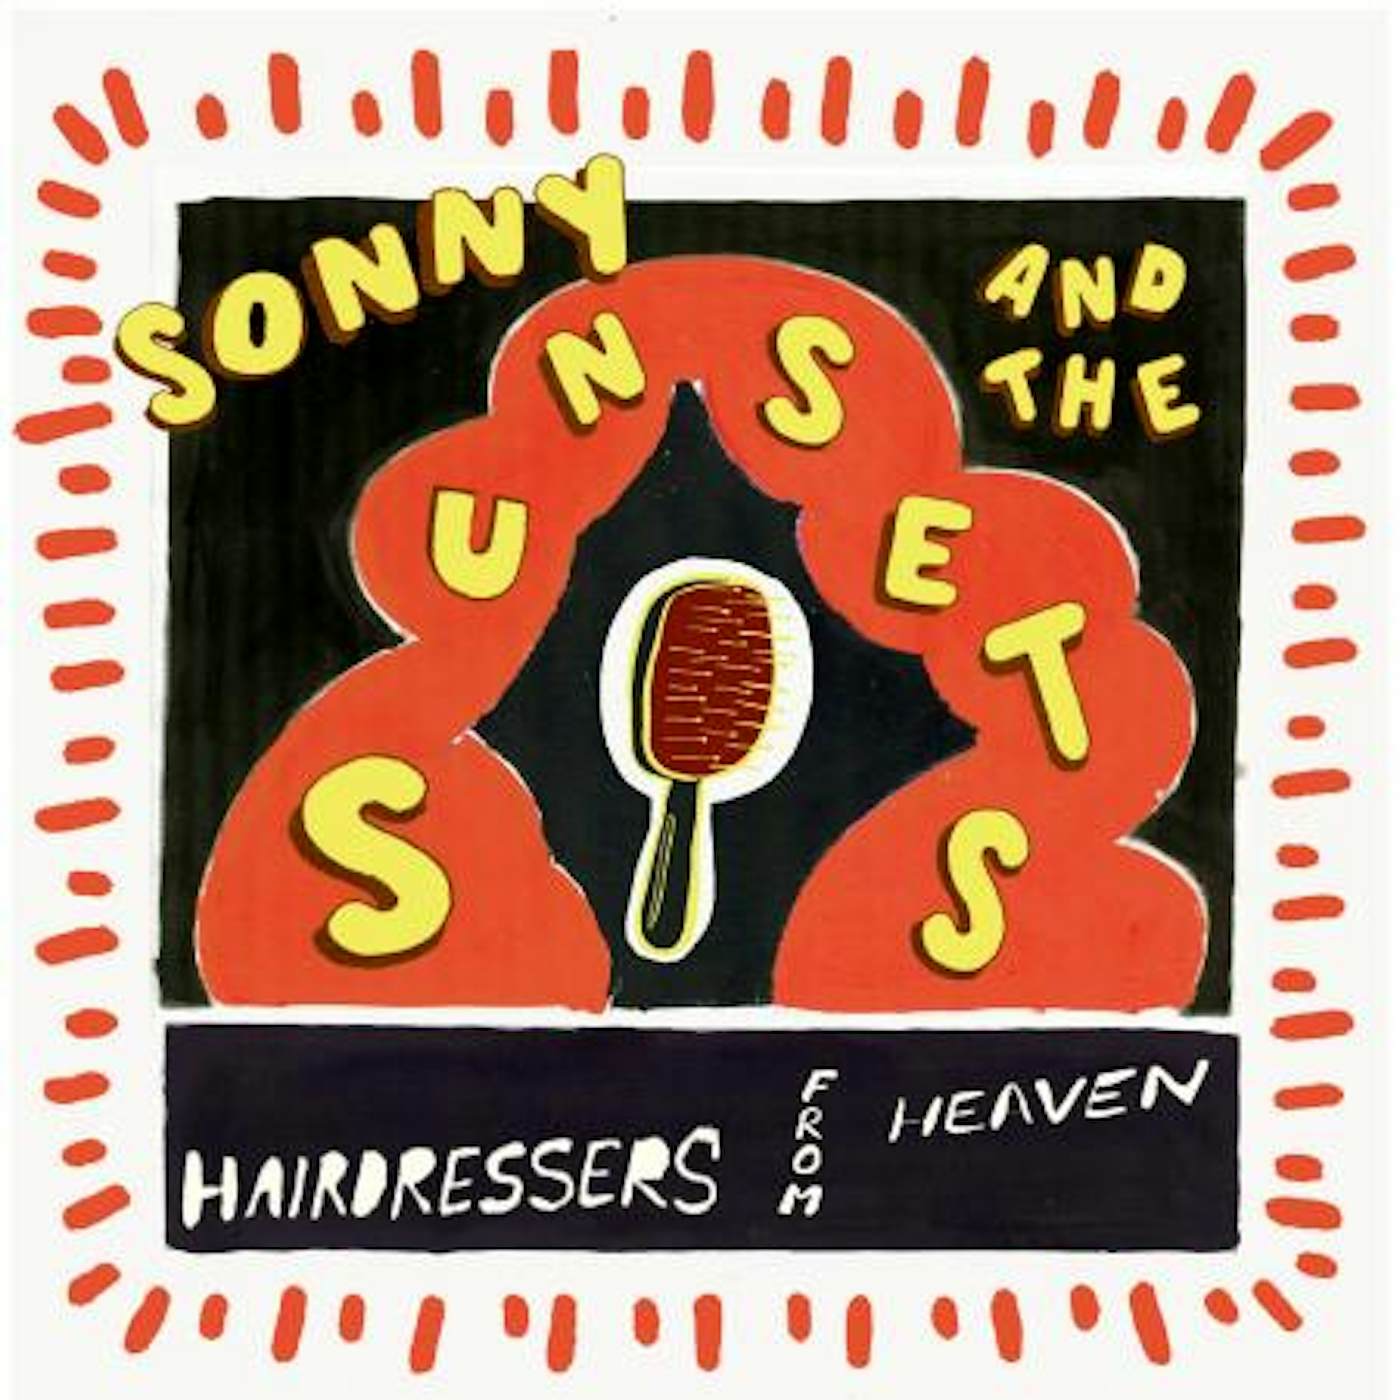 Sonny & The Sunsets Hairdressers from Heaven Vinyl Record